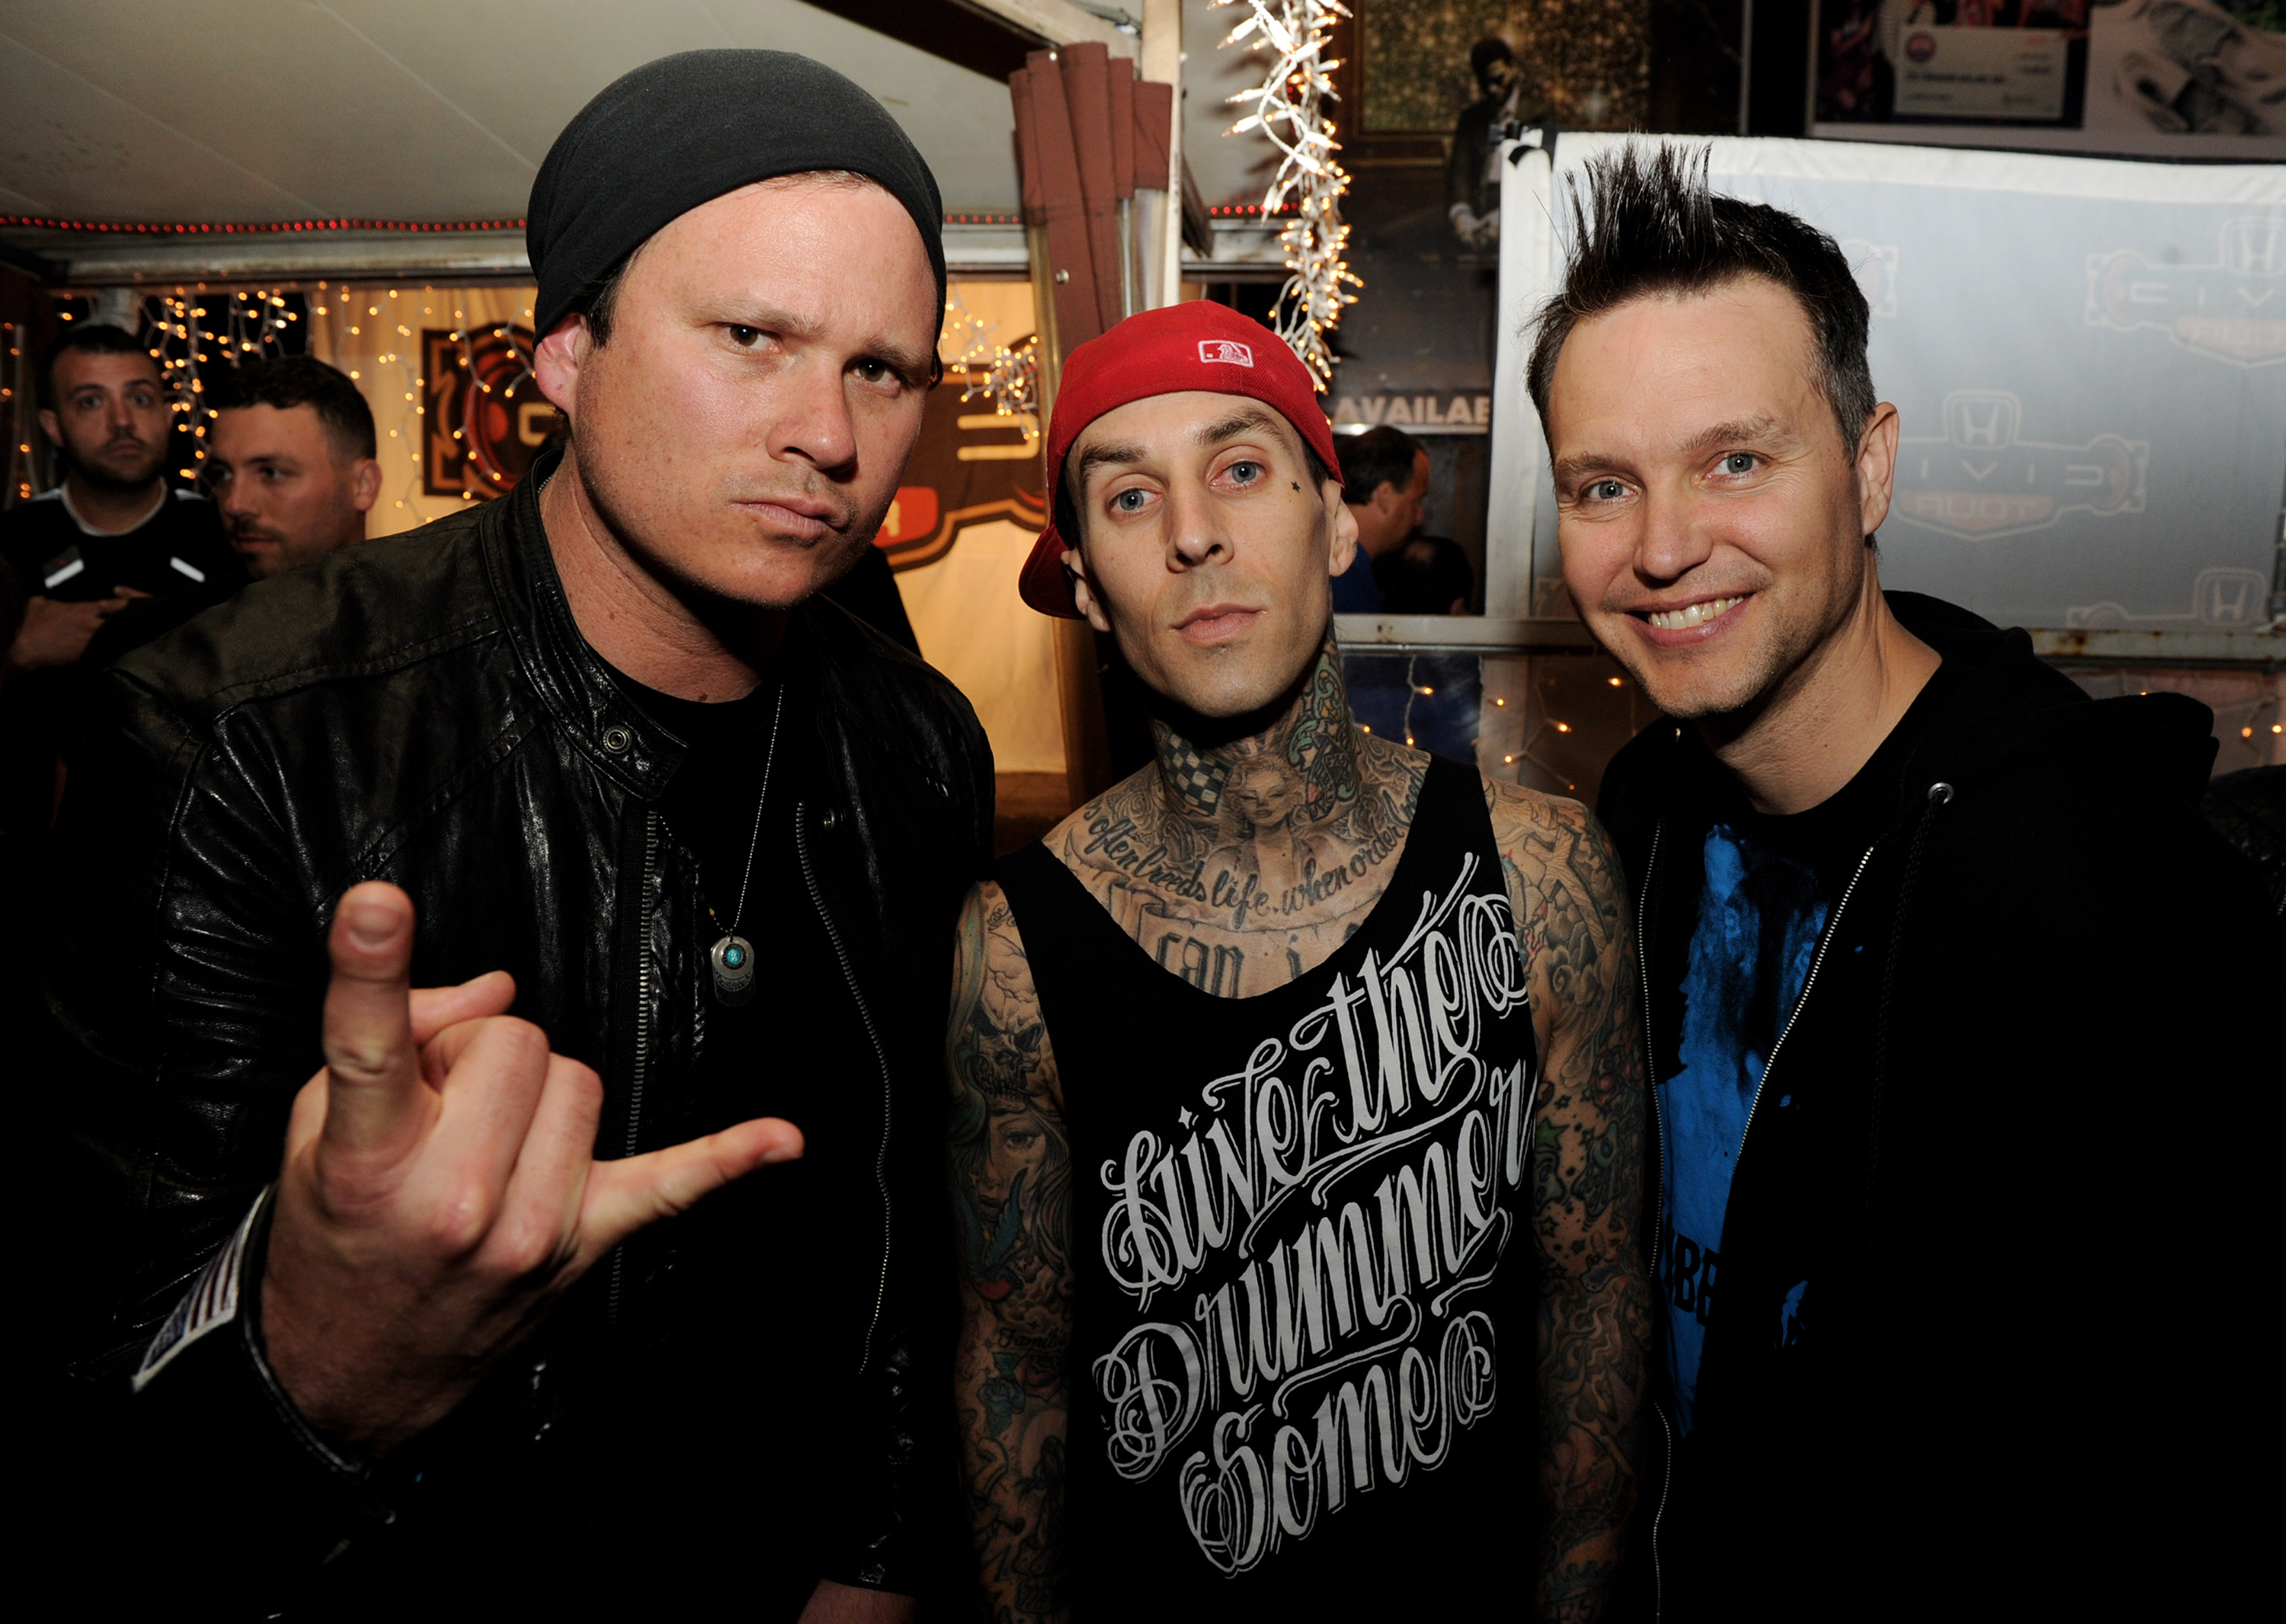 Blink-182 reunion tour to stop in Dallas with classic band members